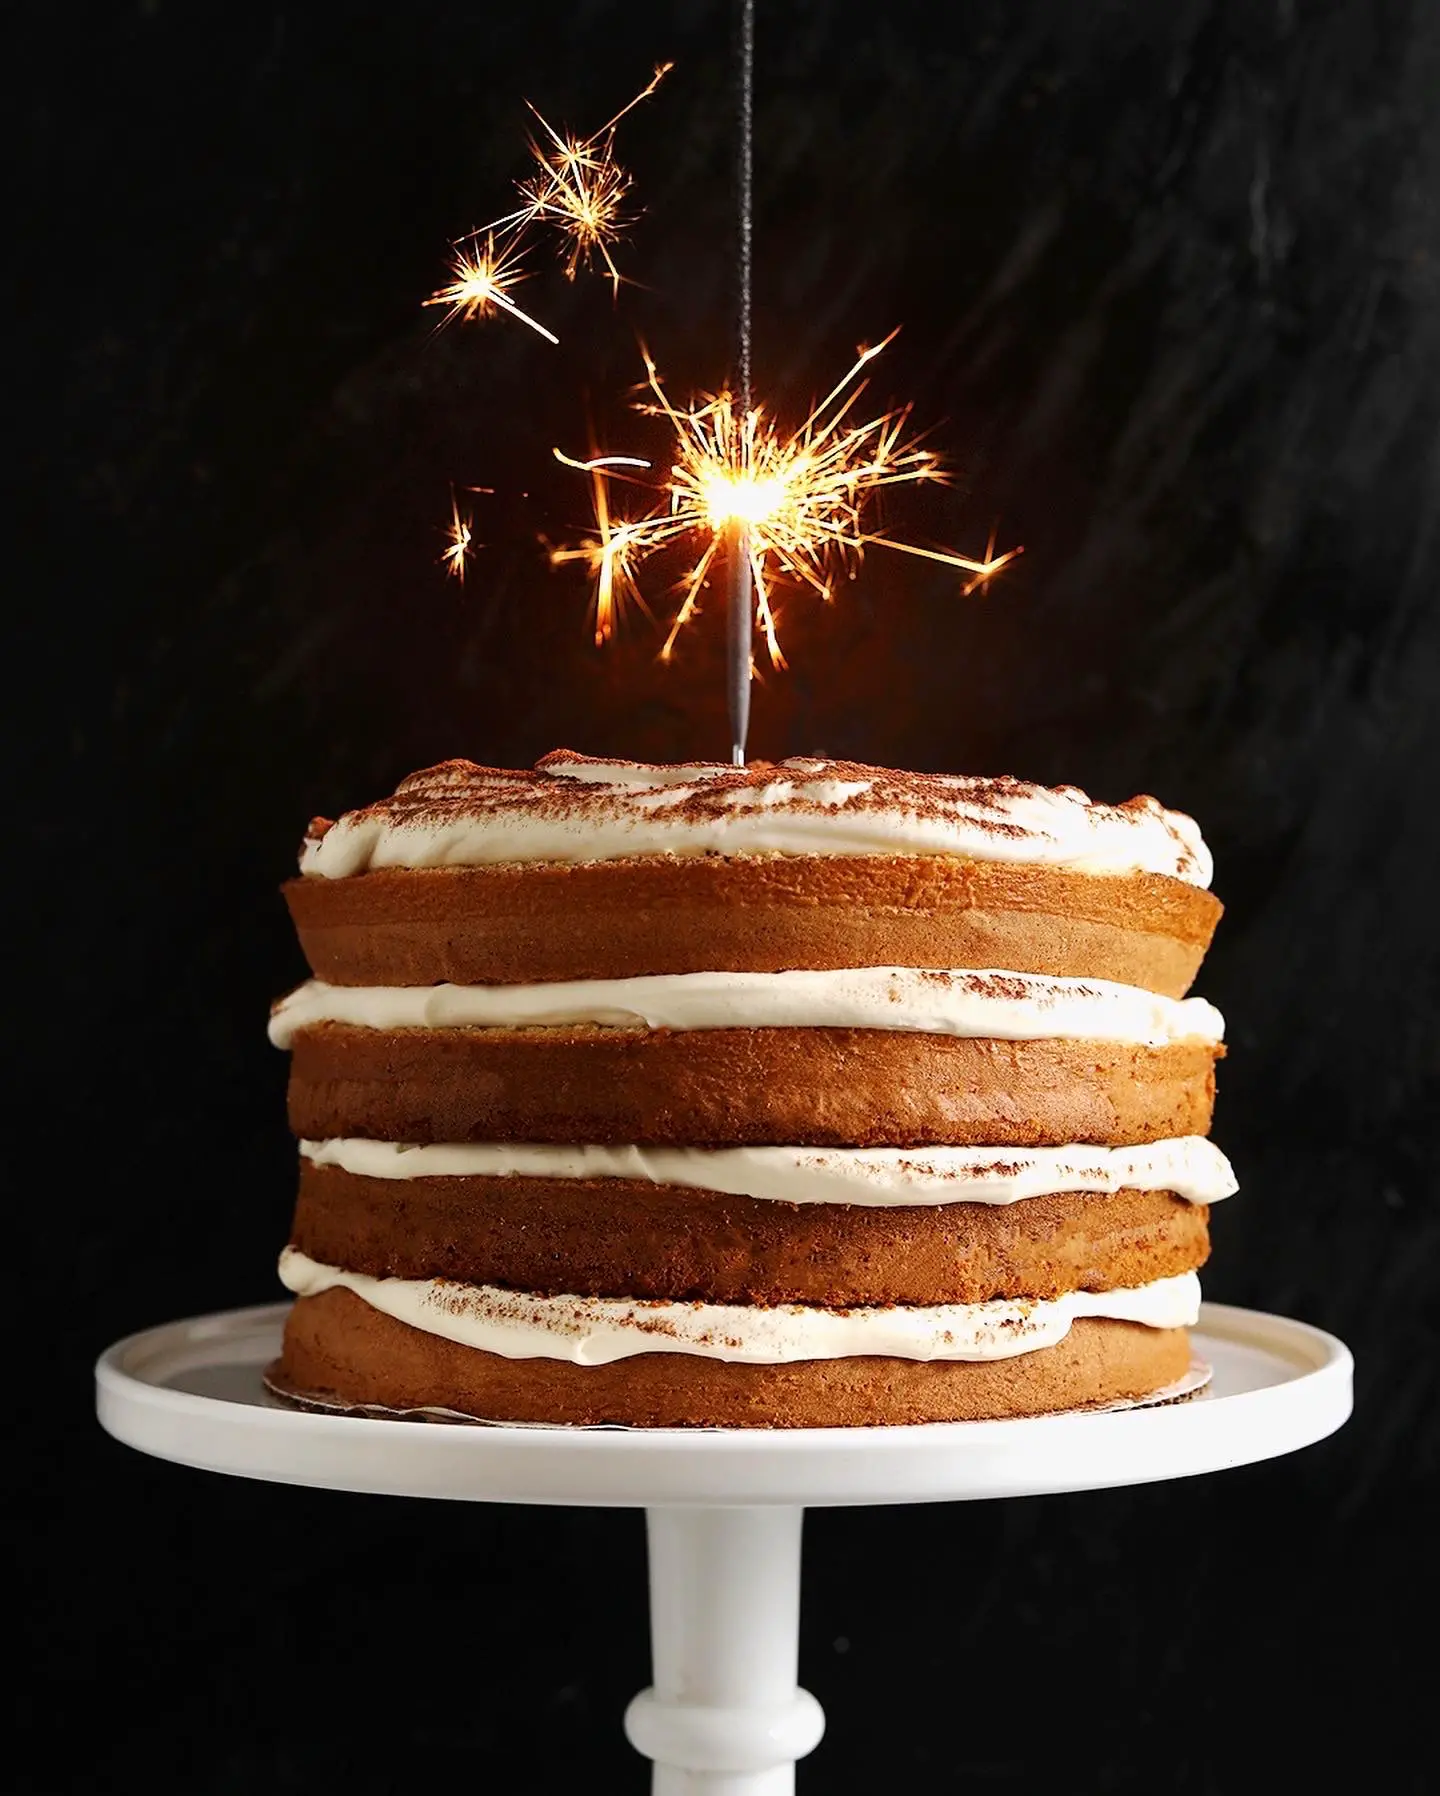 a cake on a white cake stand with layers of cake and mascarpone whipped cream. A burning sparkler is sticking out of the top